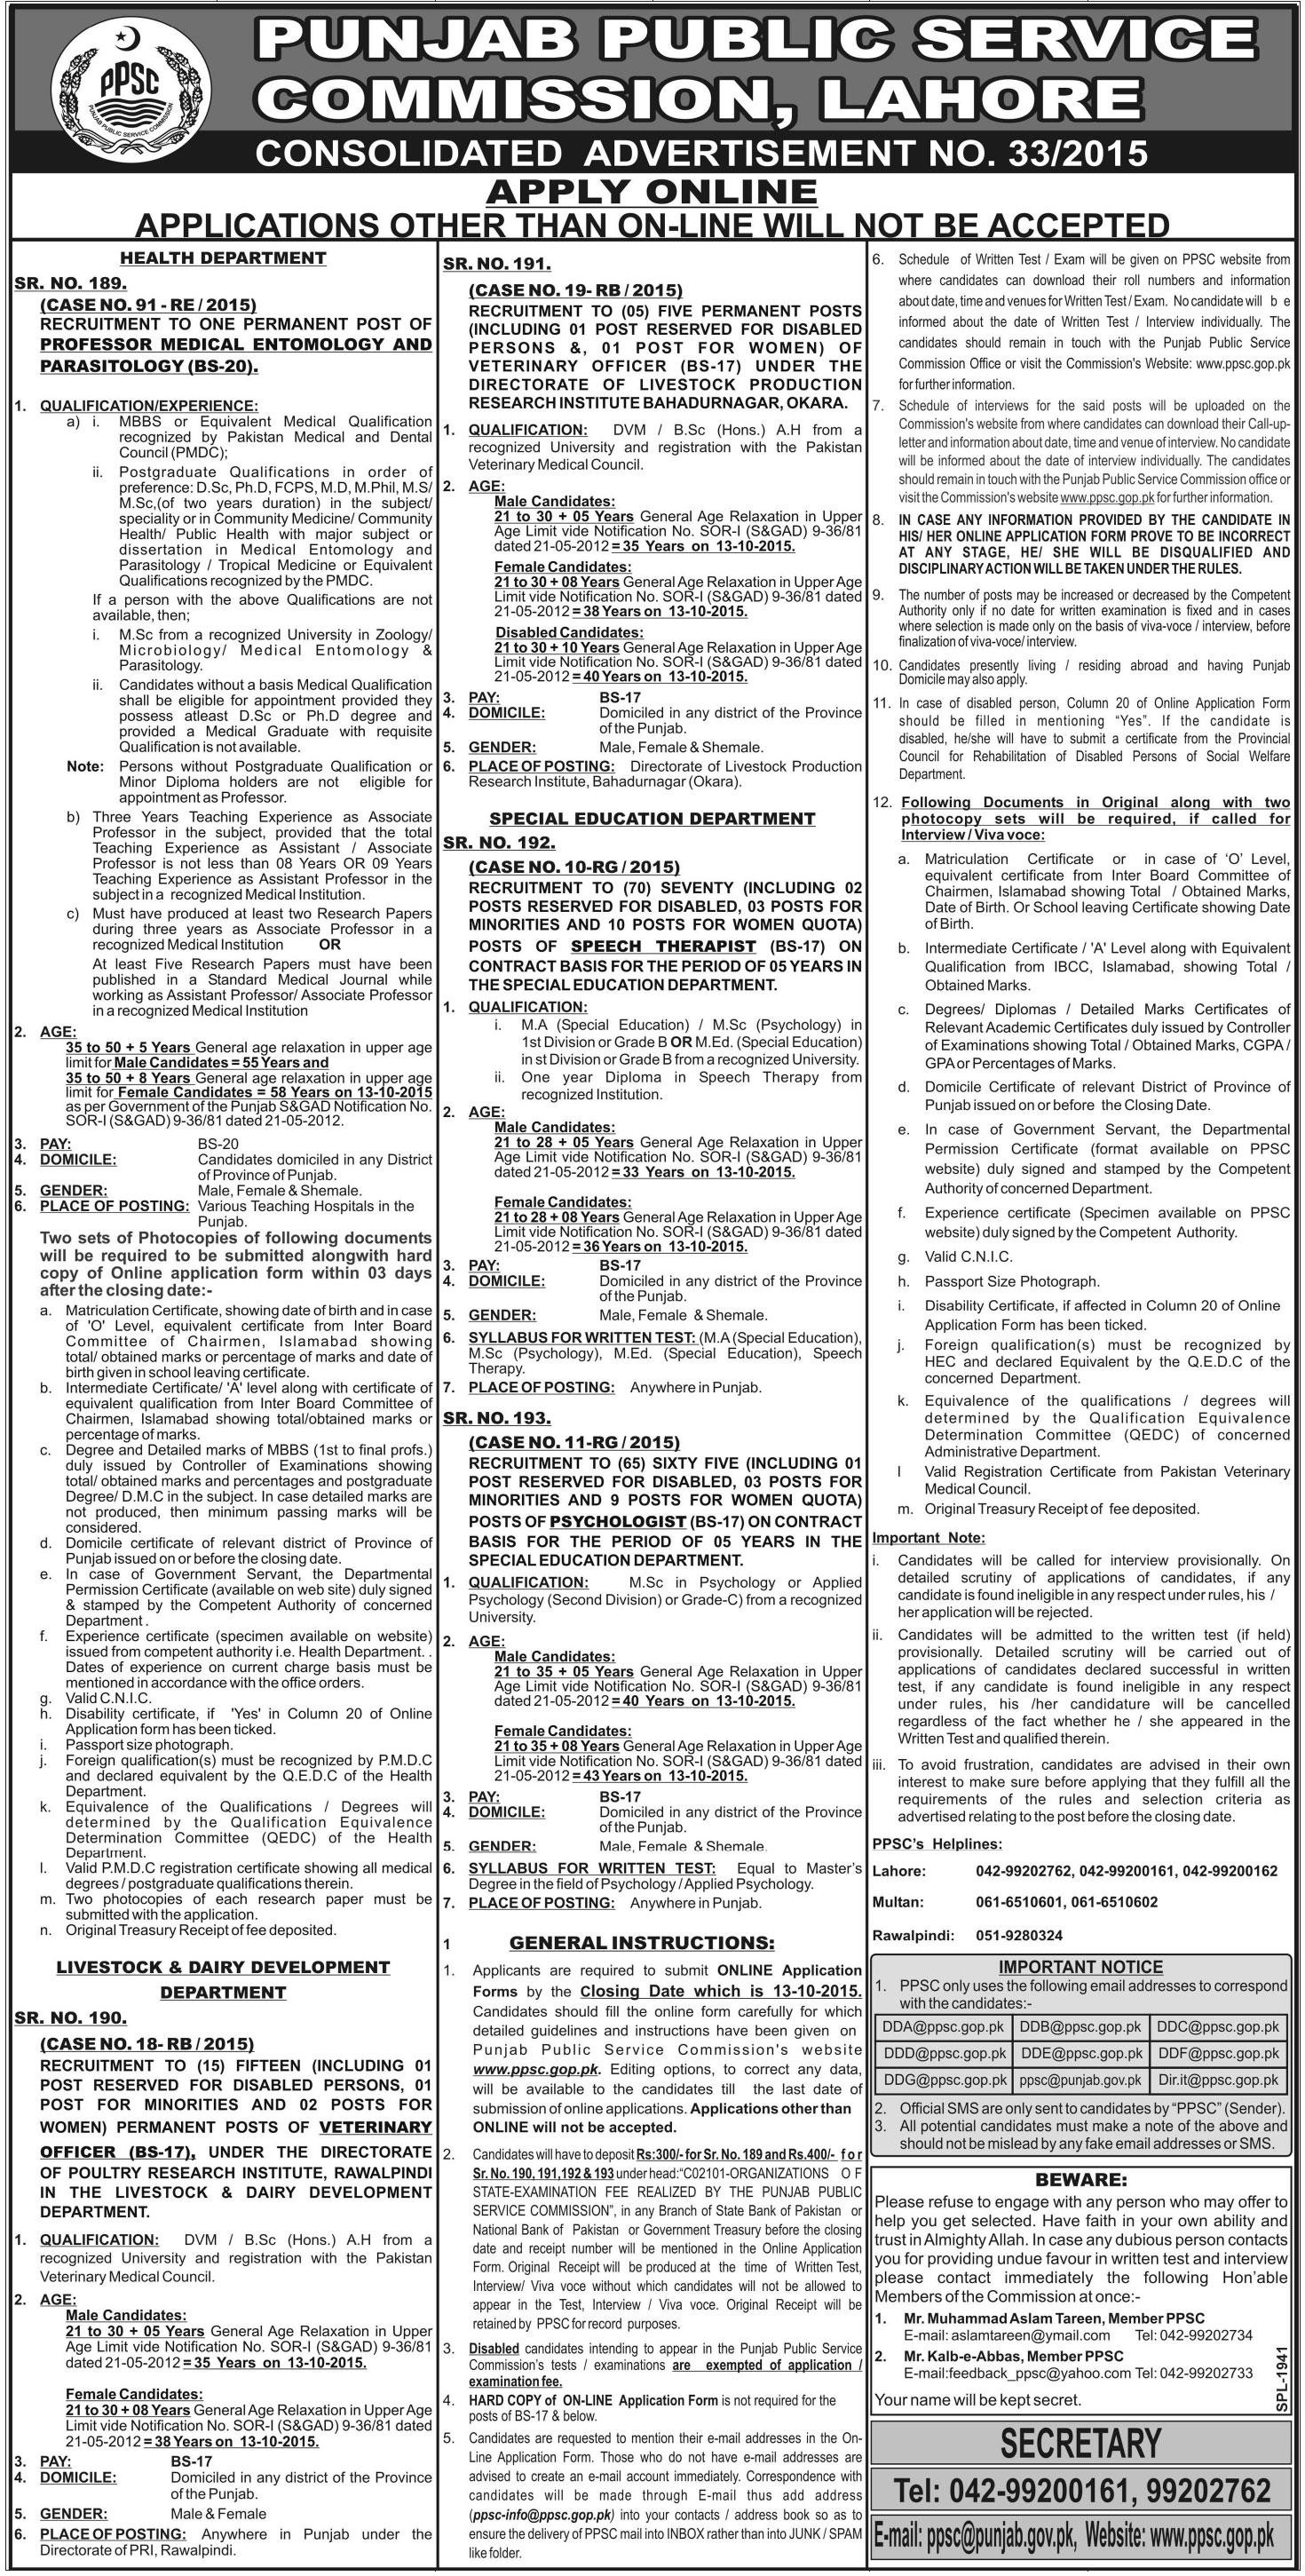 PPSC Health Department Jobs 2023 Advertisement For Parasitology, Professor Medical